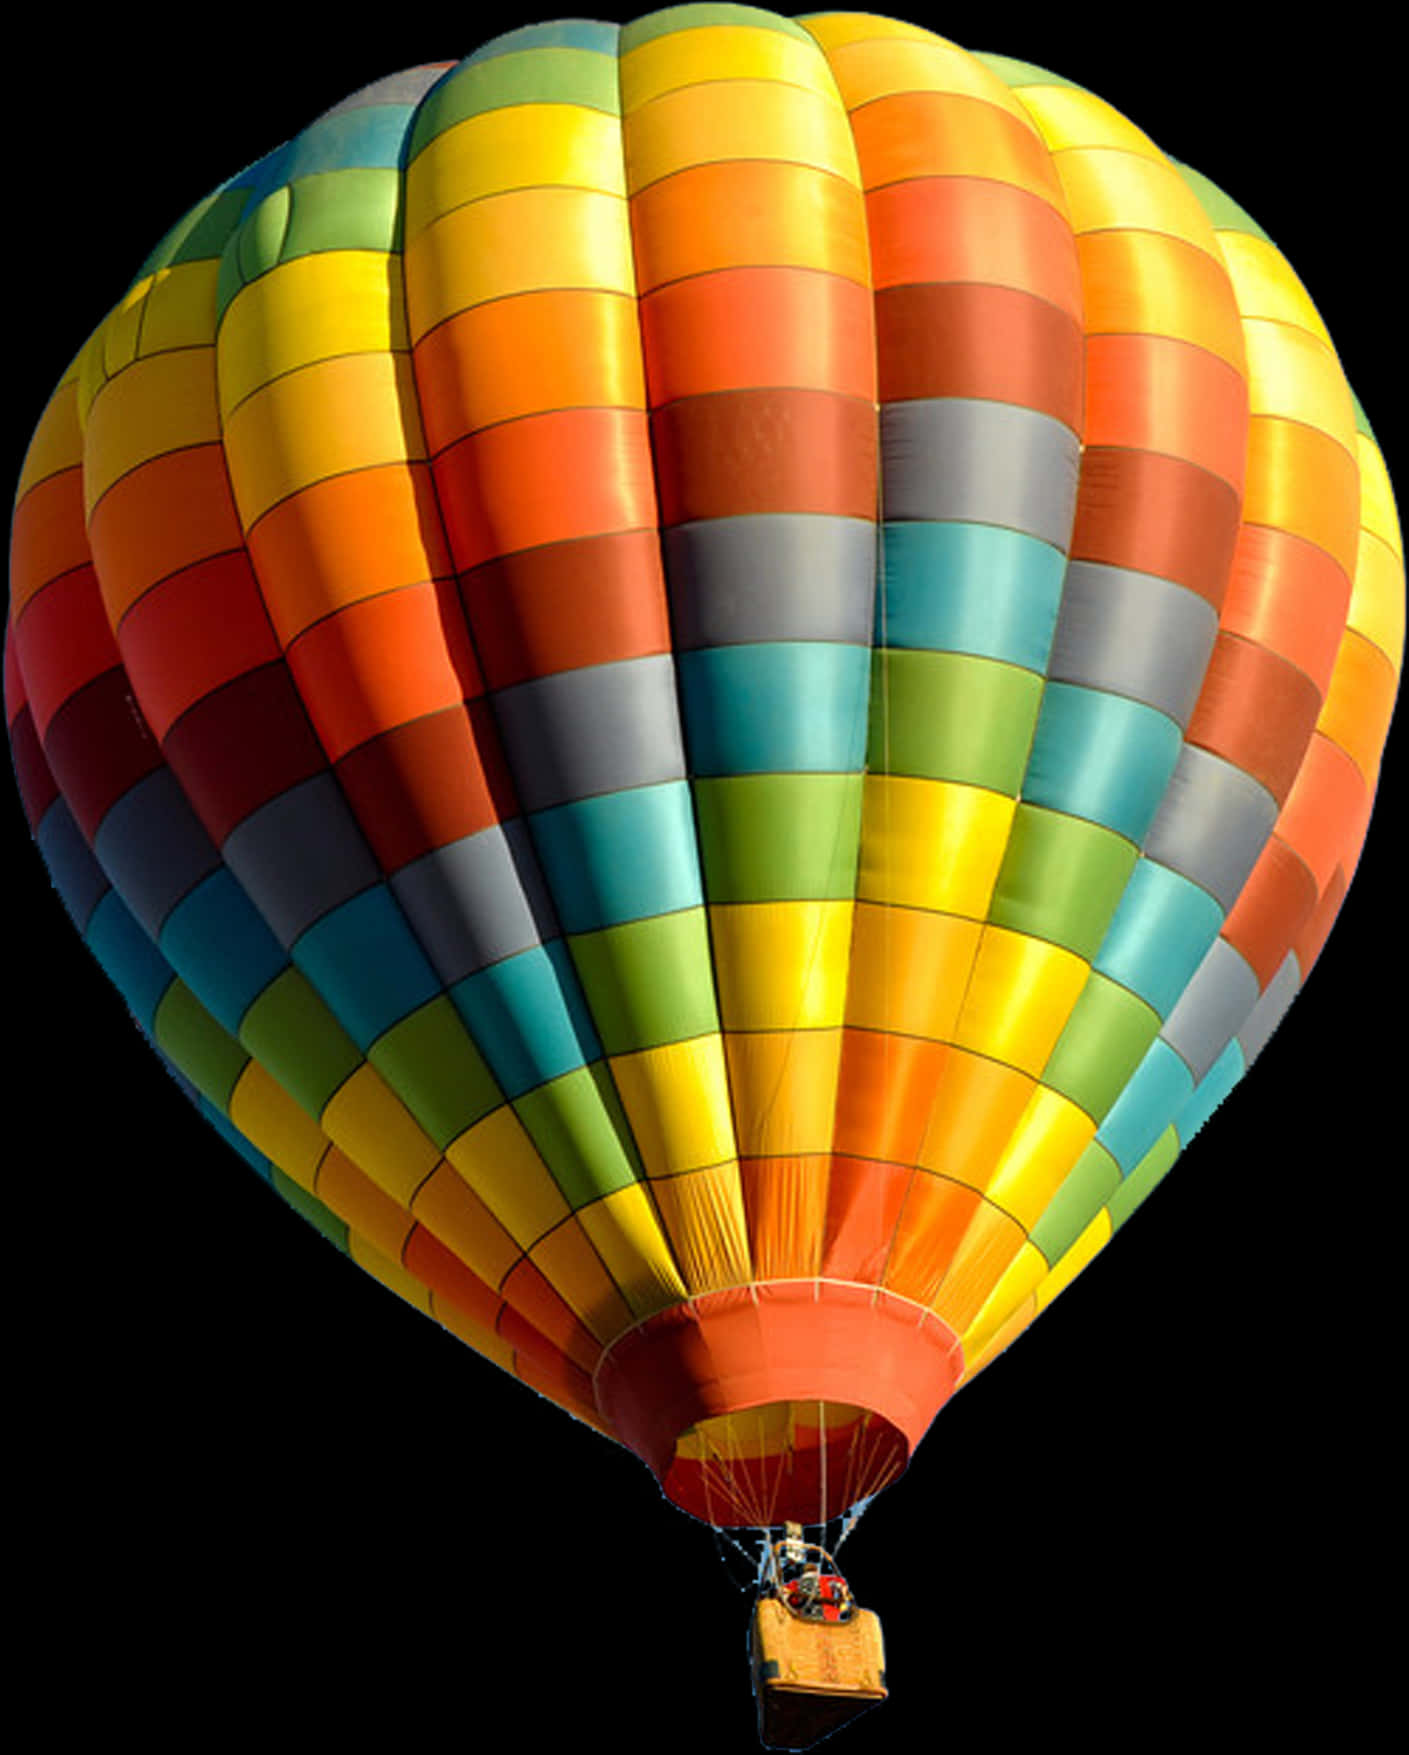 Colorful Hot Air Balloon Transparent Background